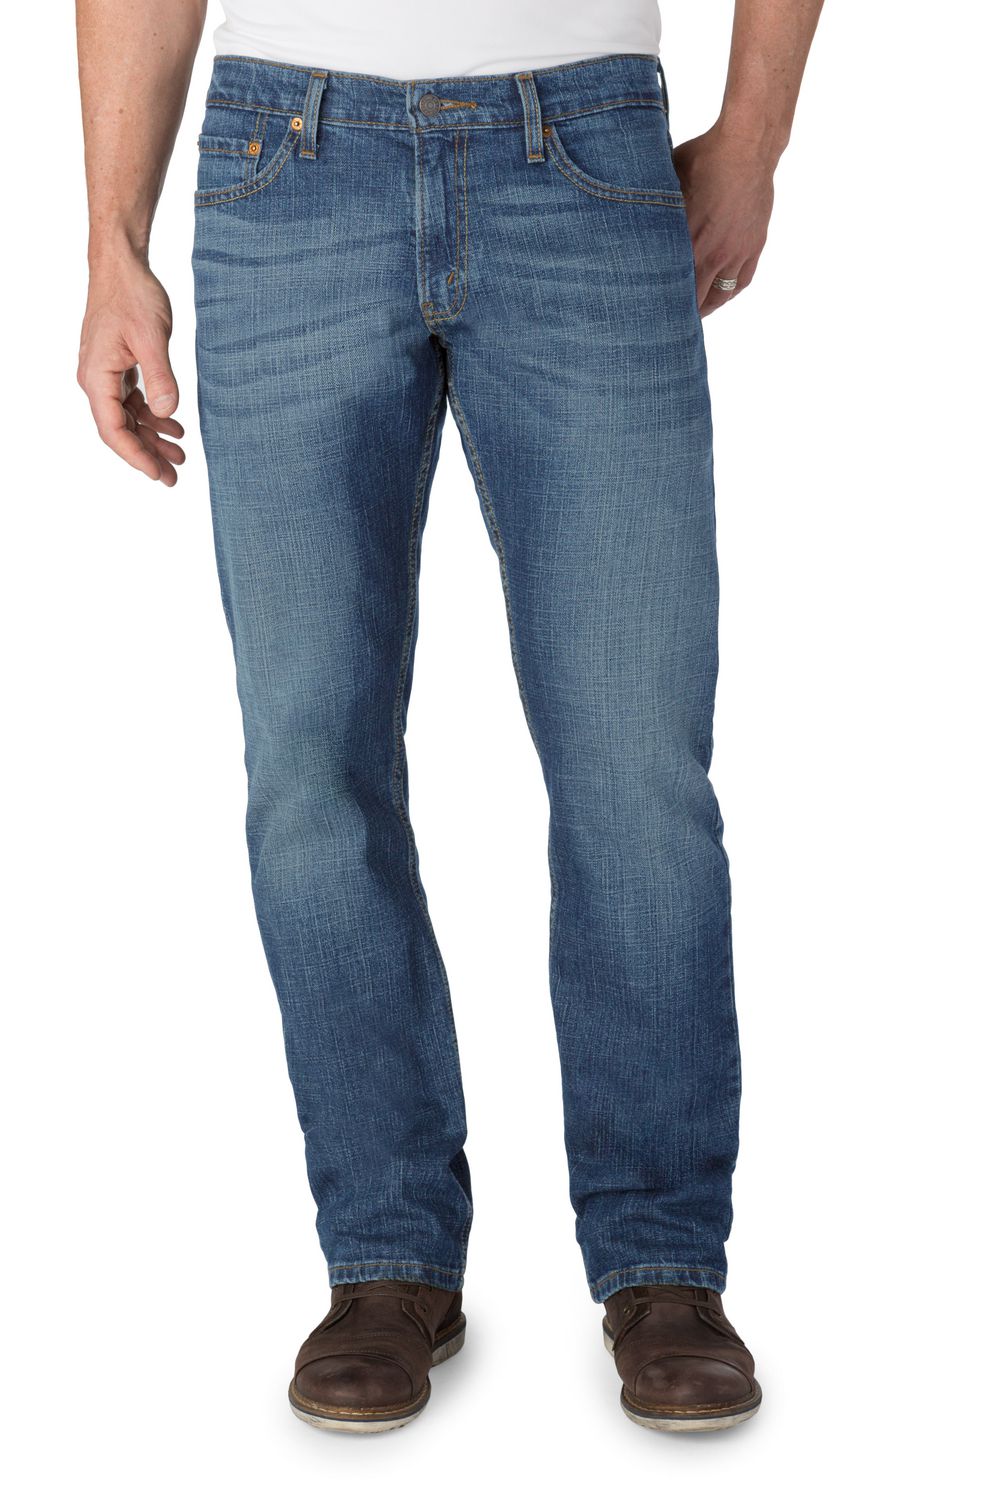 Signature by Levi Strauss & Co. Men's Straight Jeans | Walmart Canada